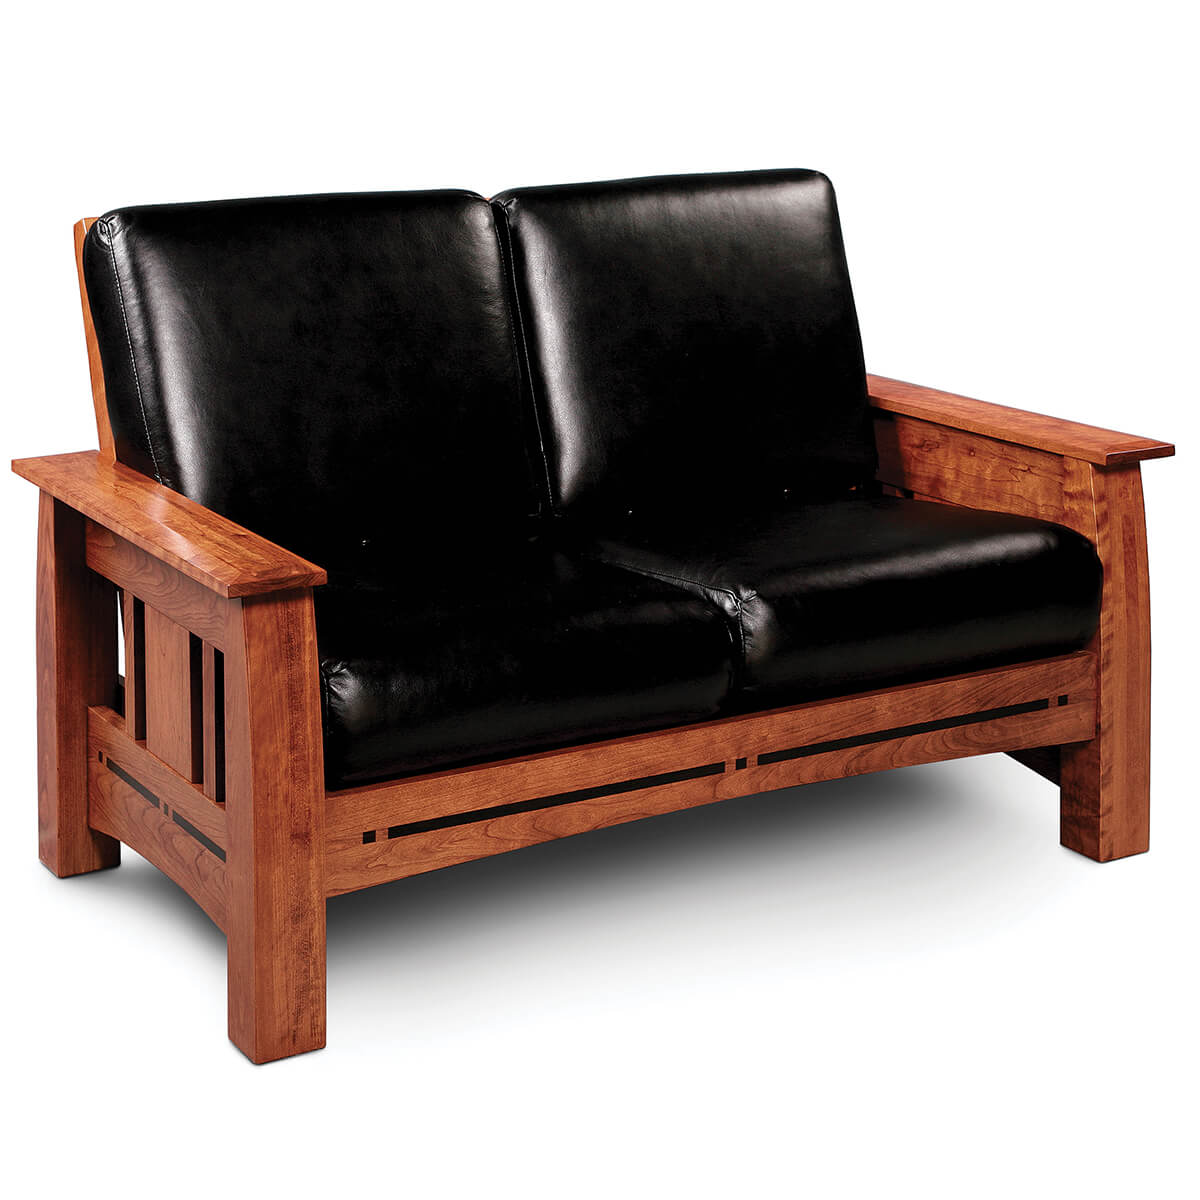 Read more about the article Aspen Loveseat Recliner